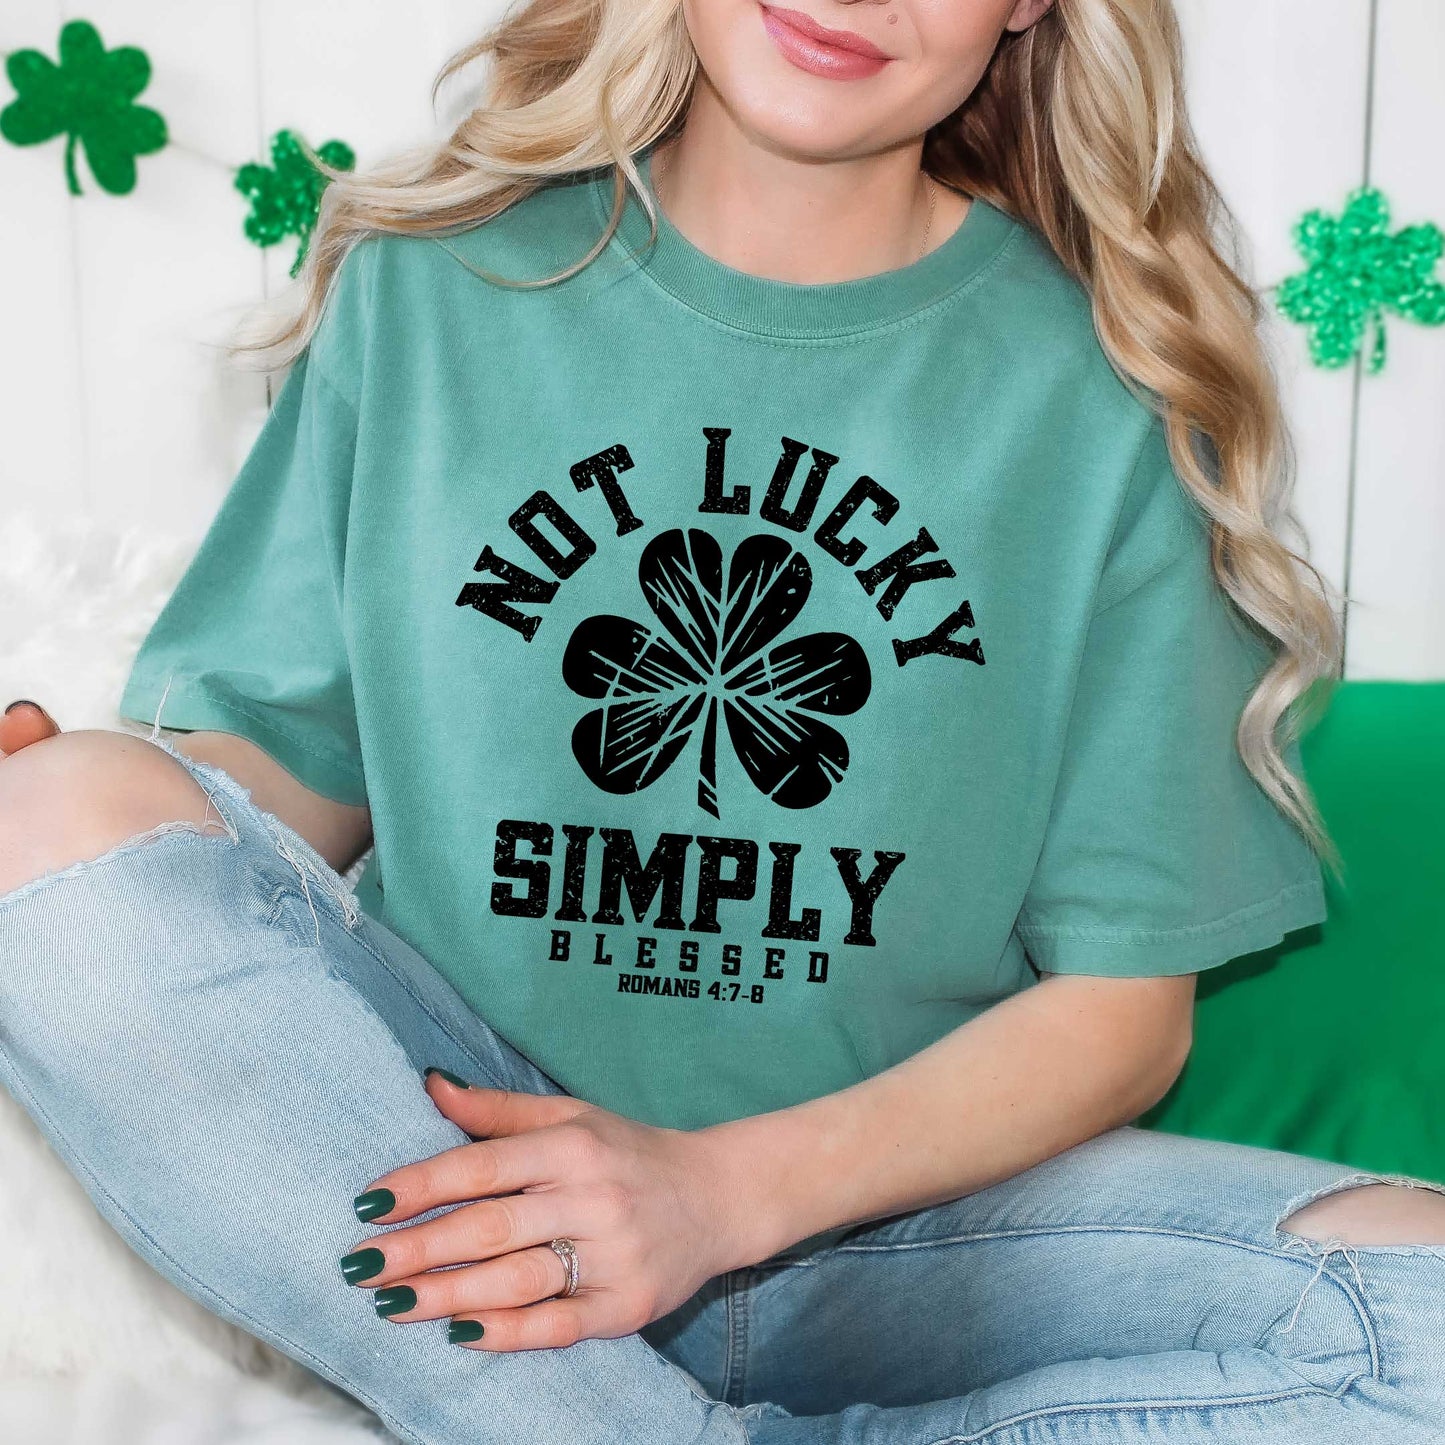 Not Lucky Blessed Clover | Garment Dyed Tee